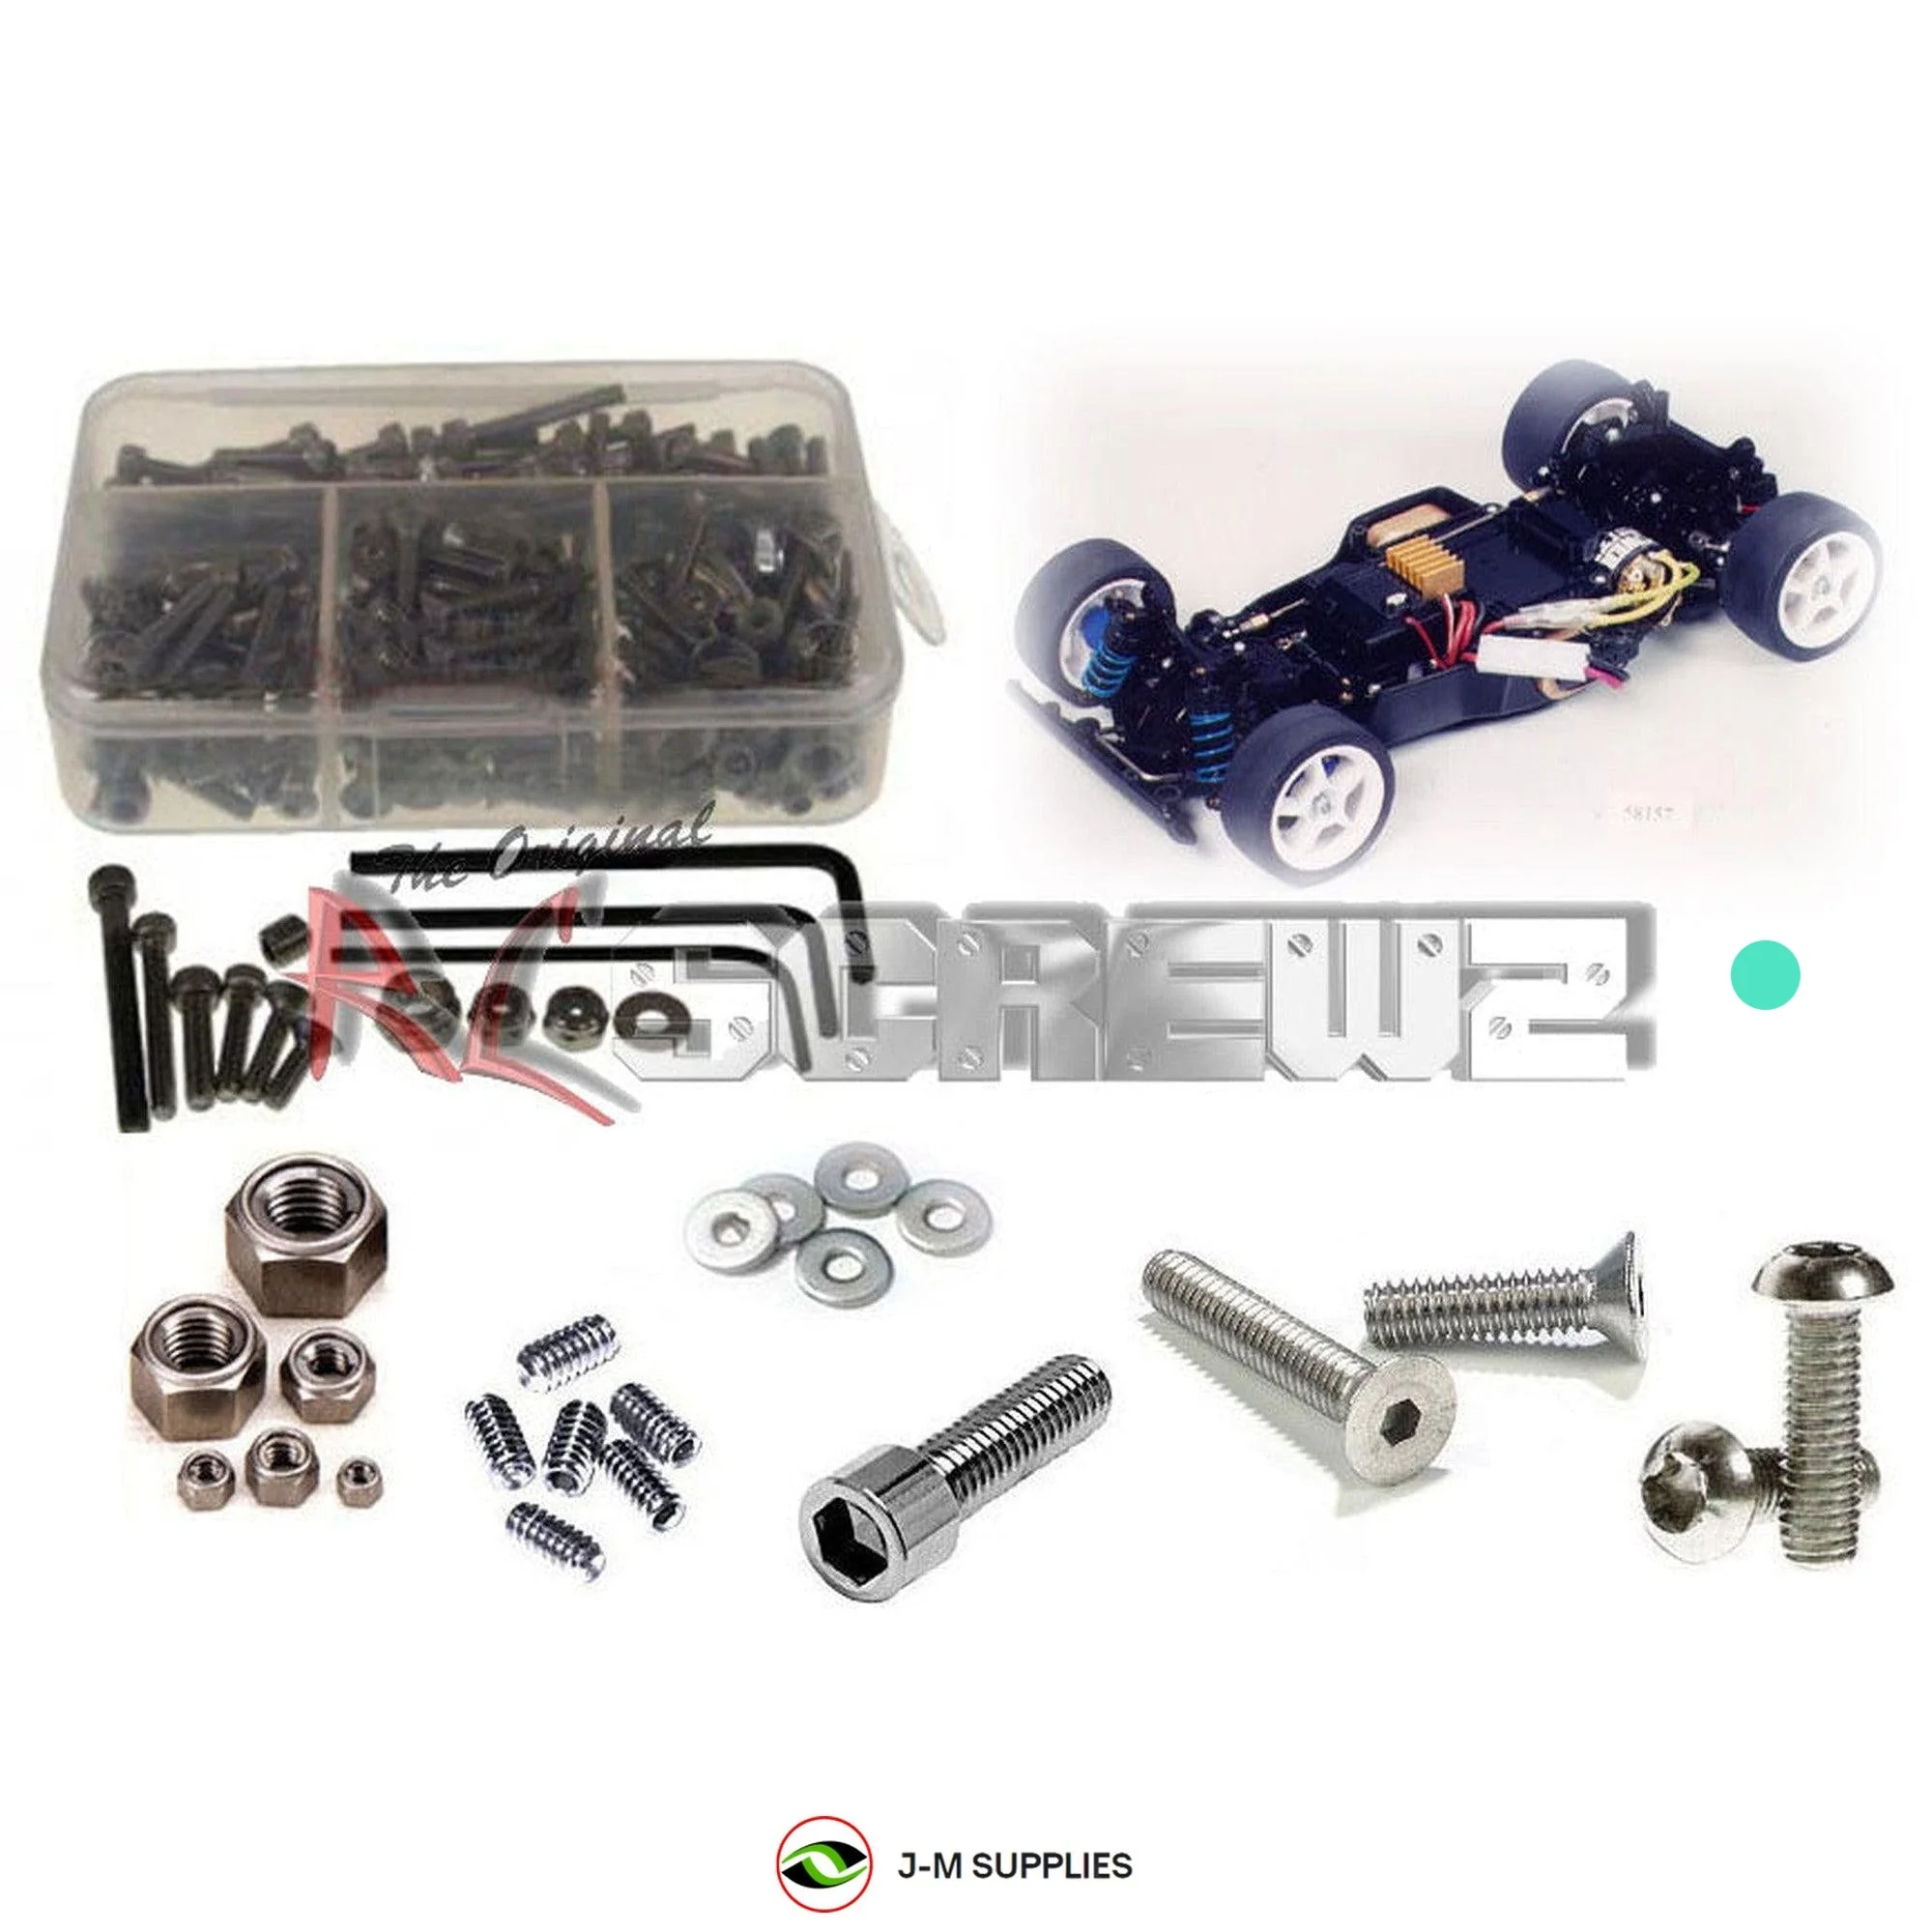 RCScrewZ Stainless Steel Screw Kit tam122 for Tamiya TA02 Series - Picture 1 of 12